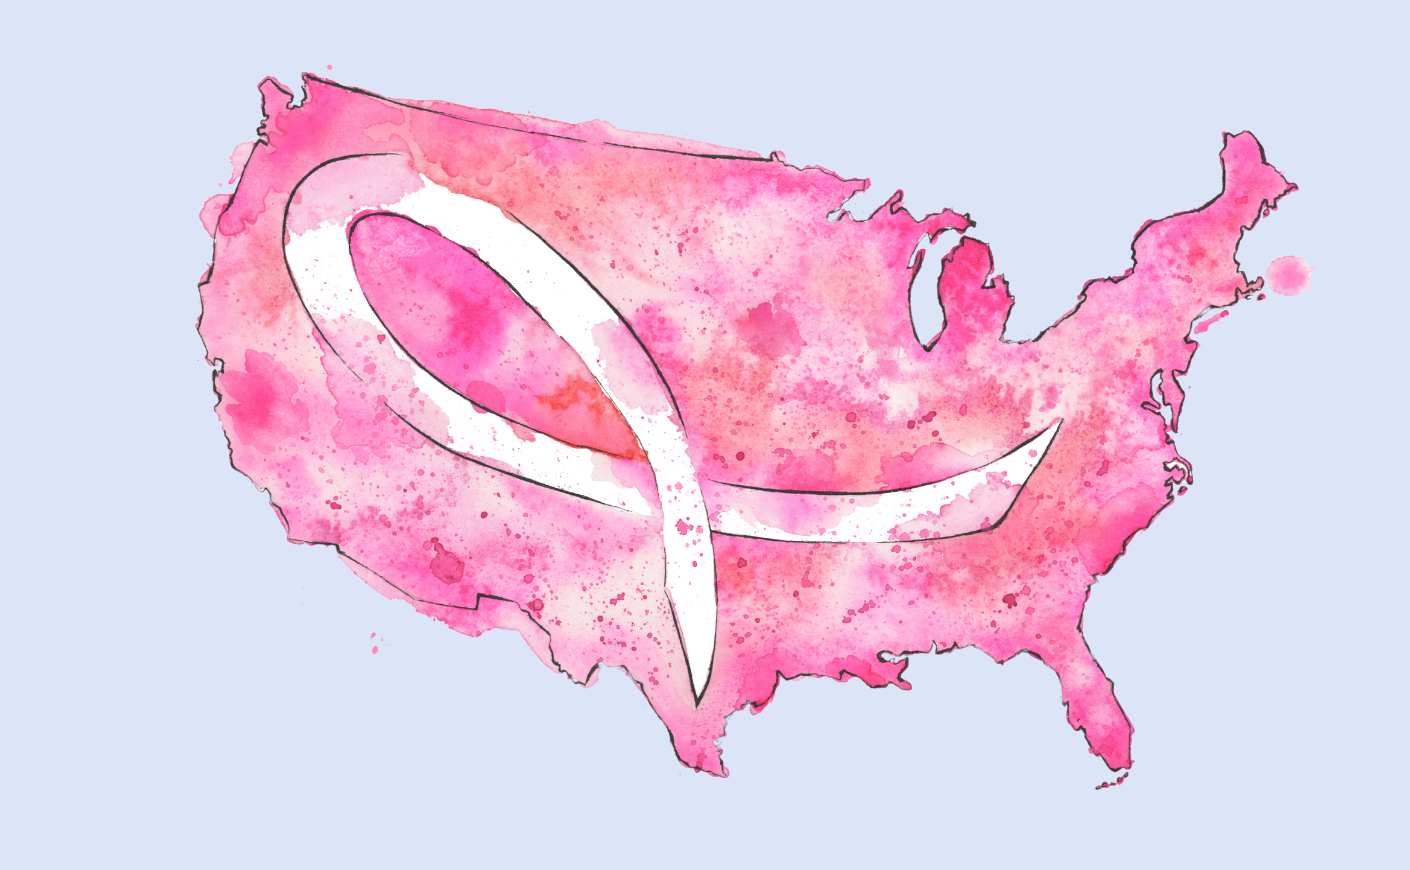 An image of the United States of America is painted in watercolor shades of pink with a pink breast cancer ribbon placed atop the country.